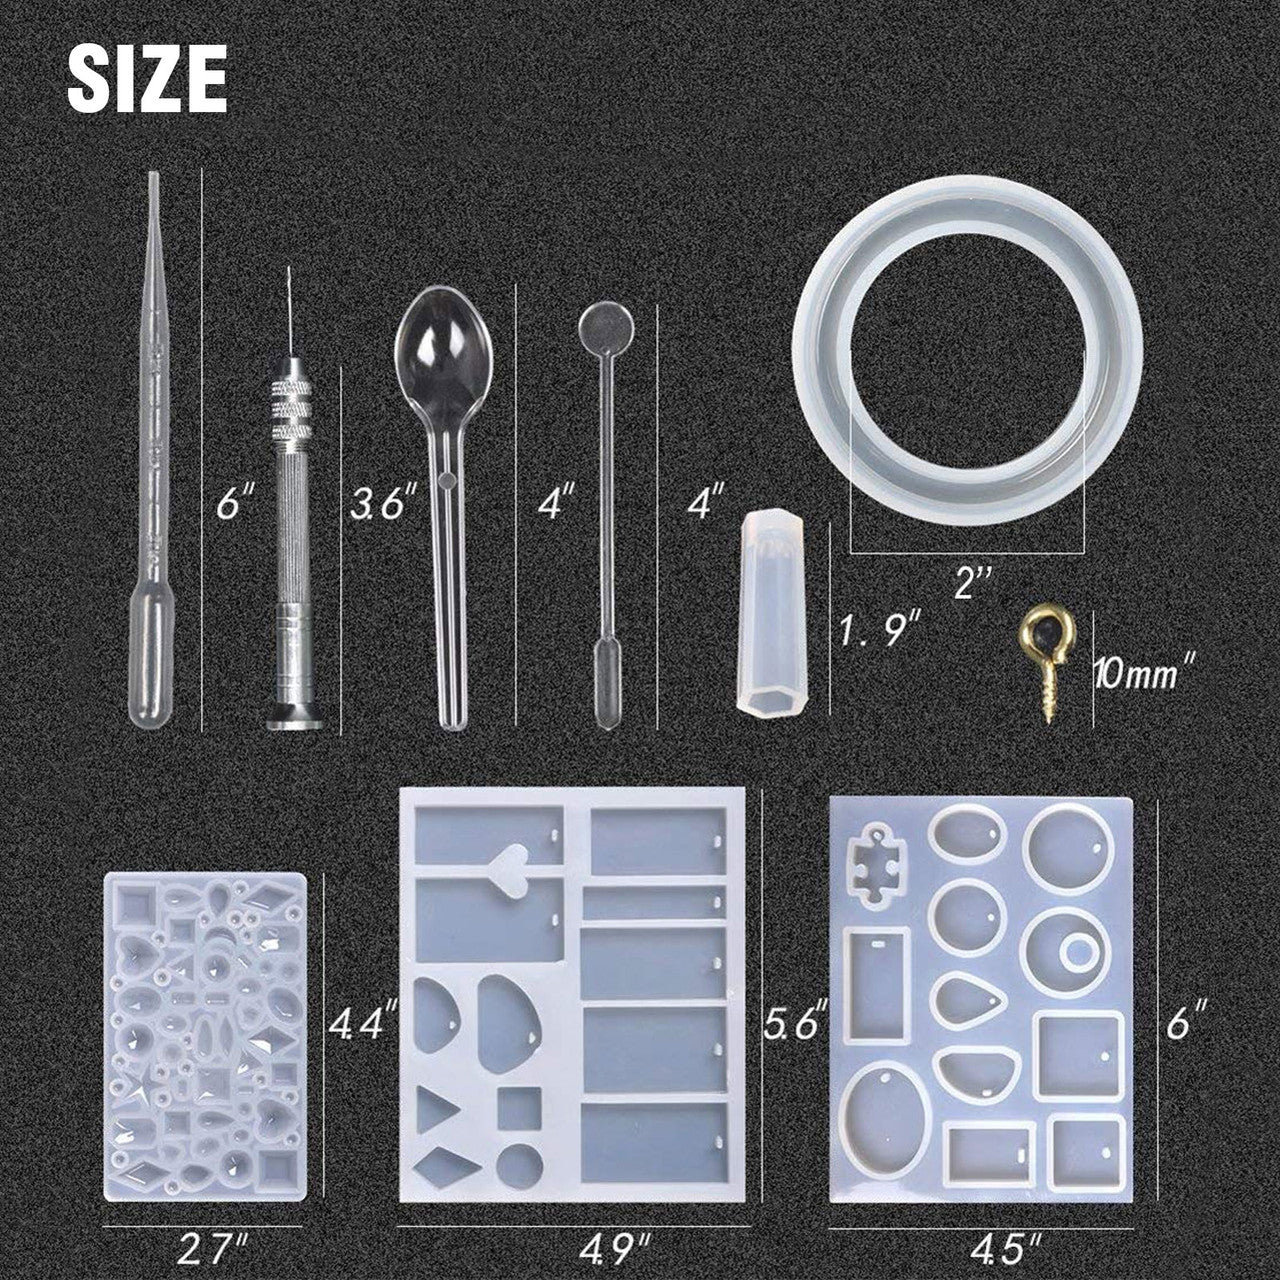 Resin Molds, Silicone Resin Casting Molds and Tools Kit for DIY Jewelry Resin Craft Making, 229Pcs